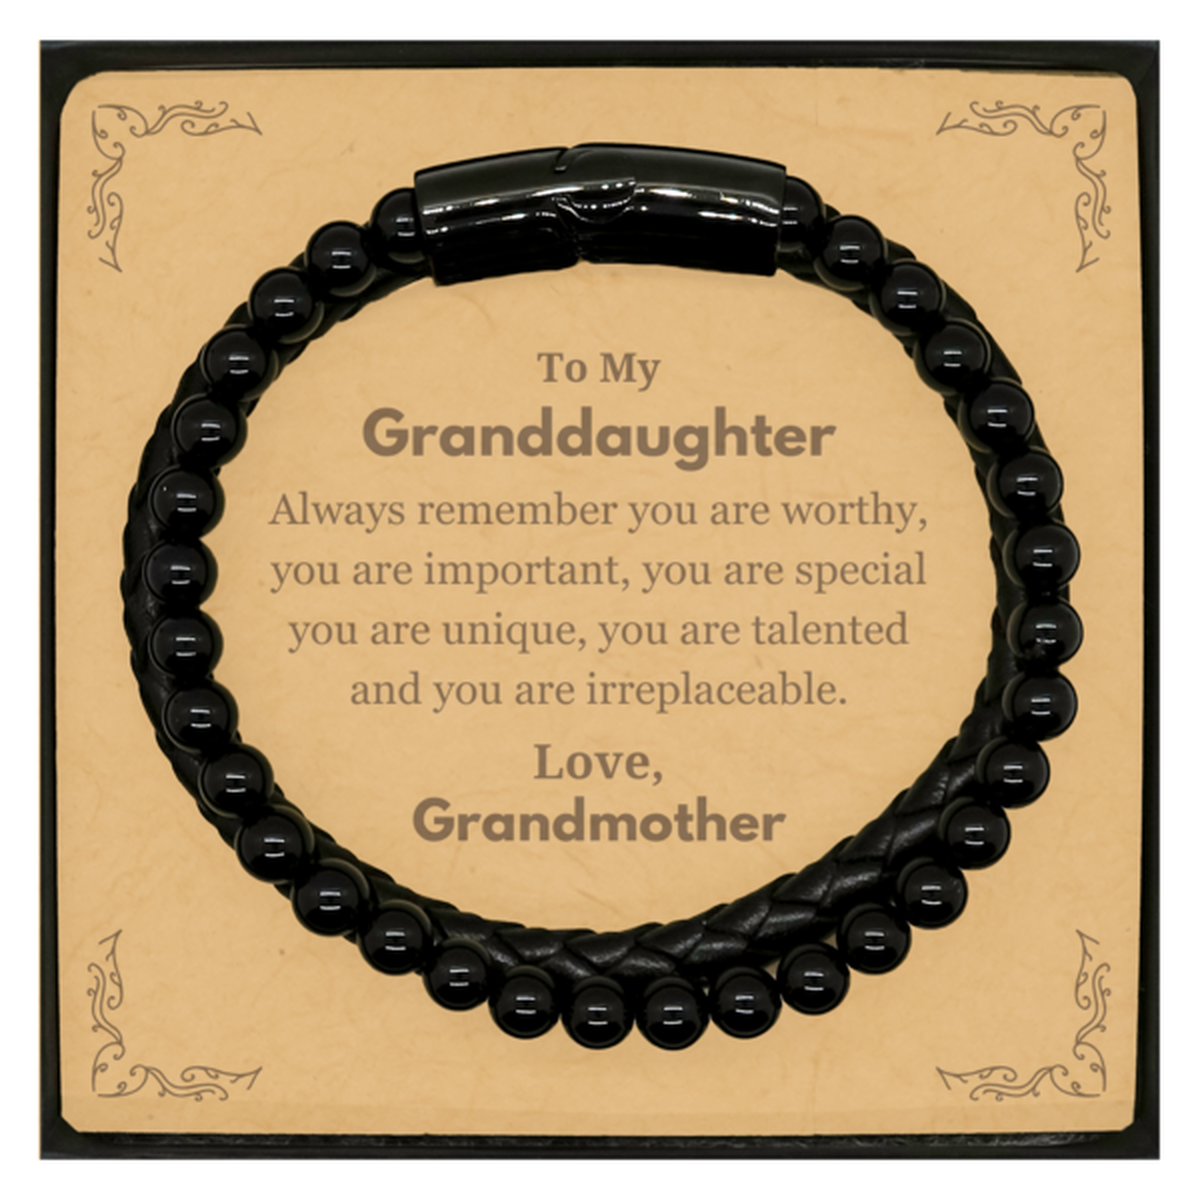 Granddaughter Birthday Gifts from Grandmother, Inspirational Stone Leather Bracelets for Granddaughter Christmas Graduation Gifts for Granddaughter Always remember you are worthy, you are important. Love, Grandmother